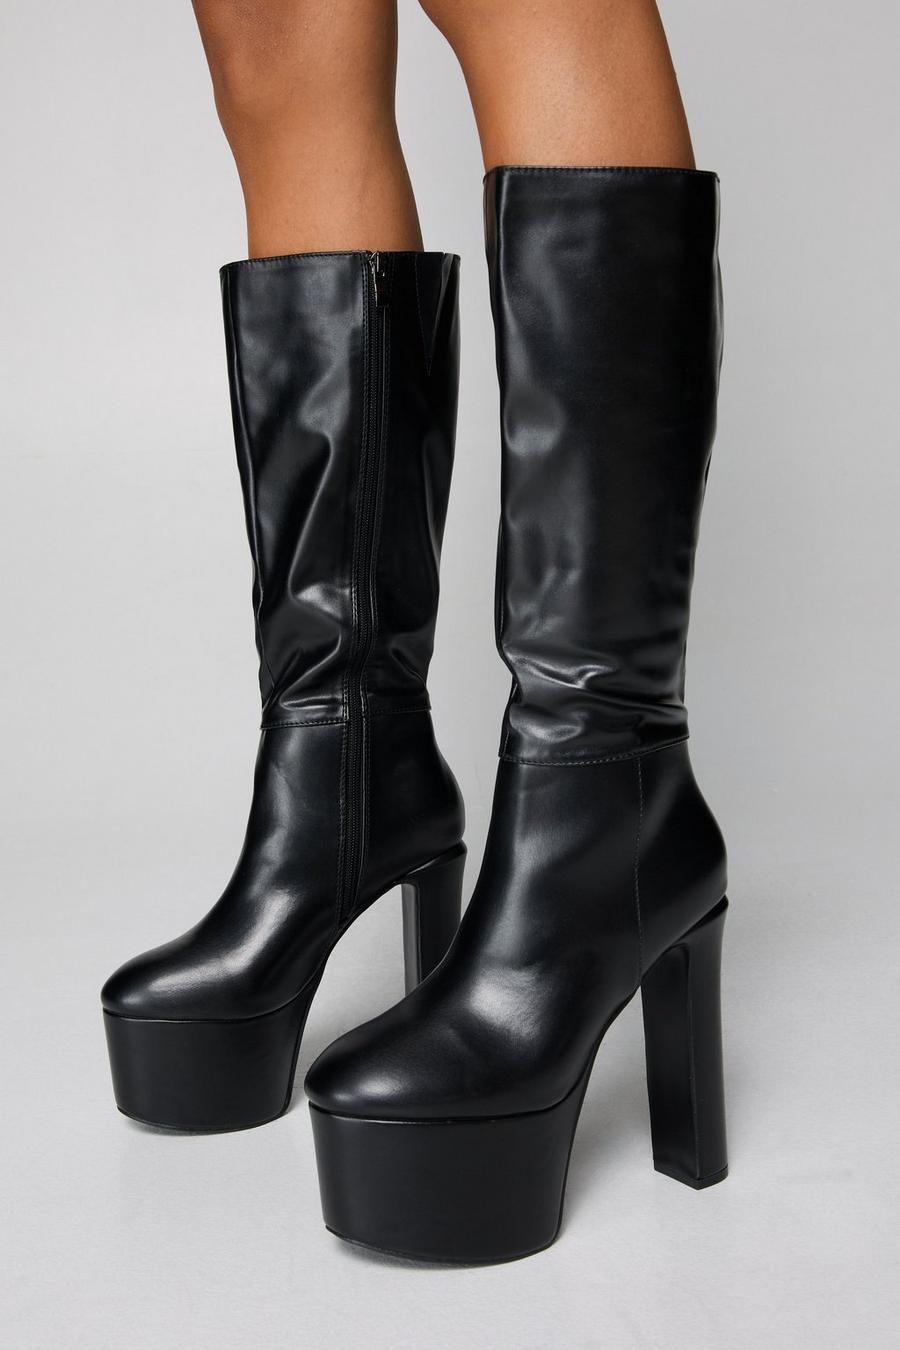 Faux Leather Extreme Platform Knee High Boots